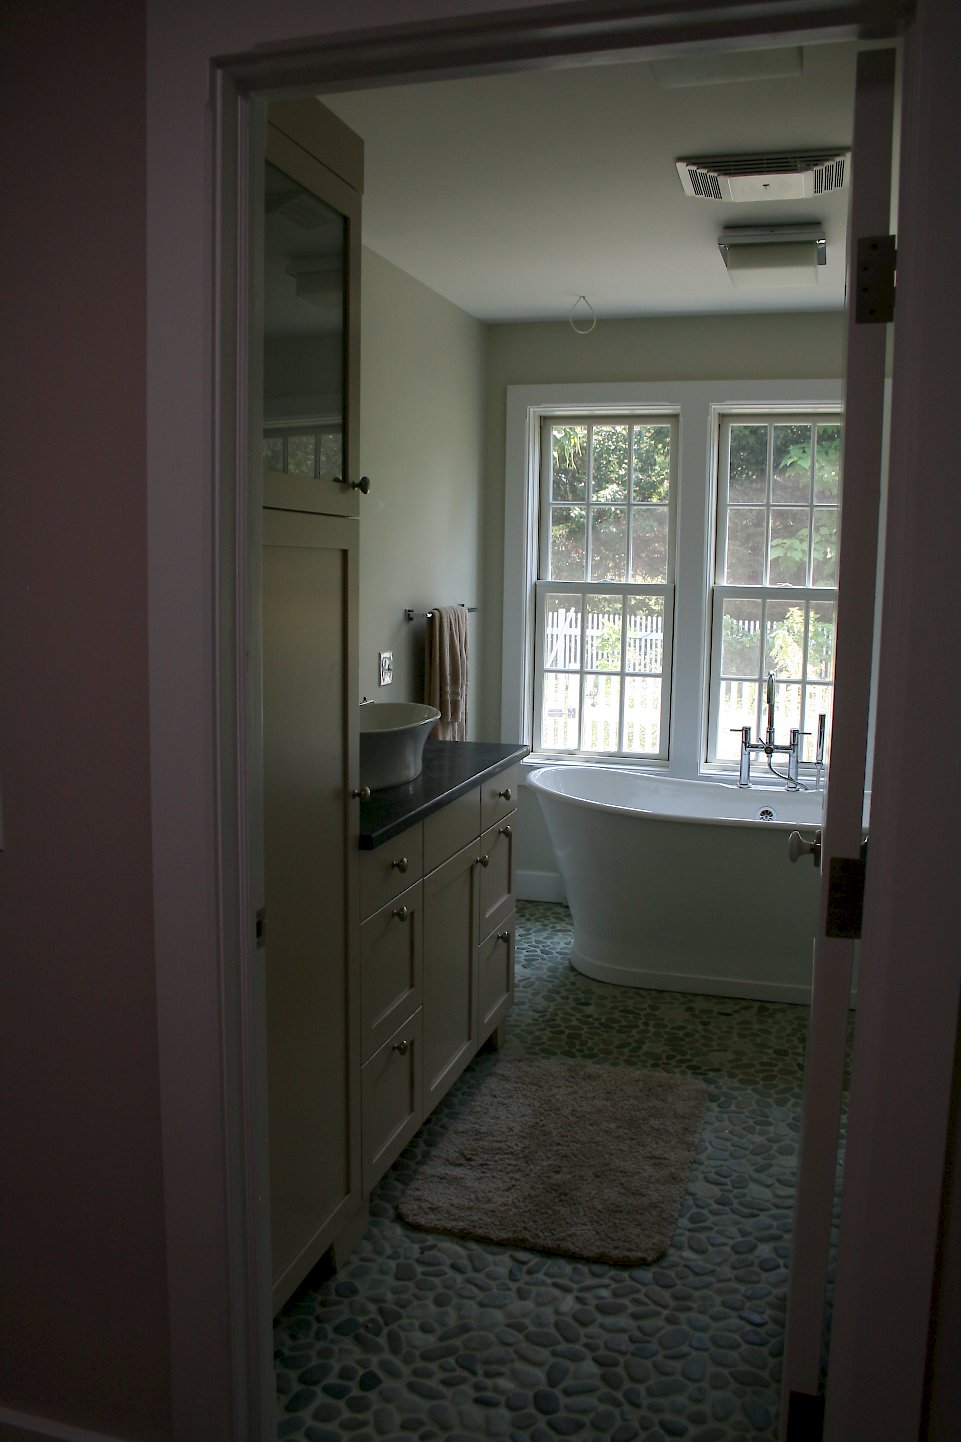 View of the bath cabinetry entering the room.